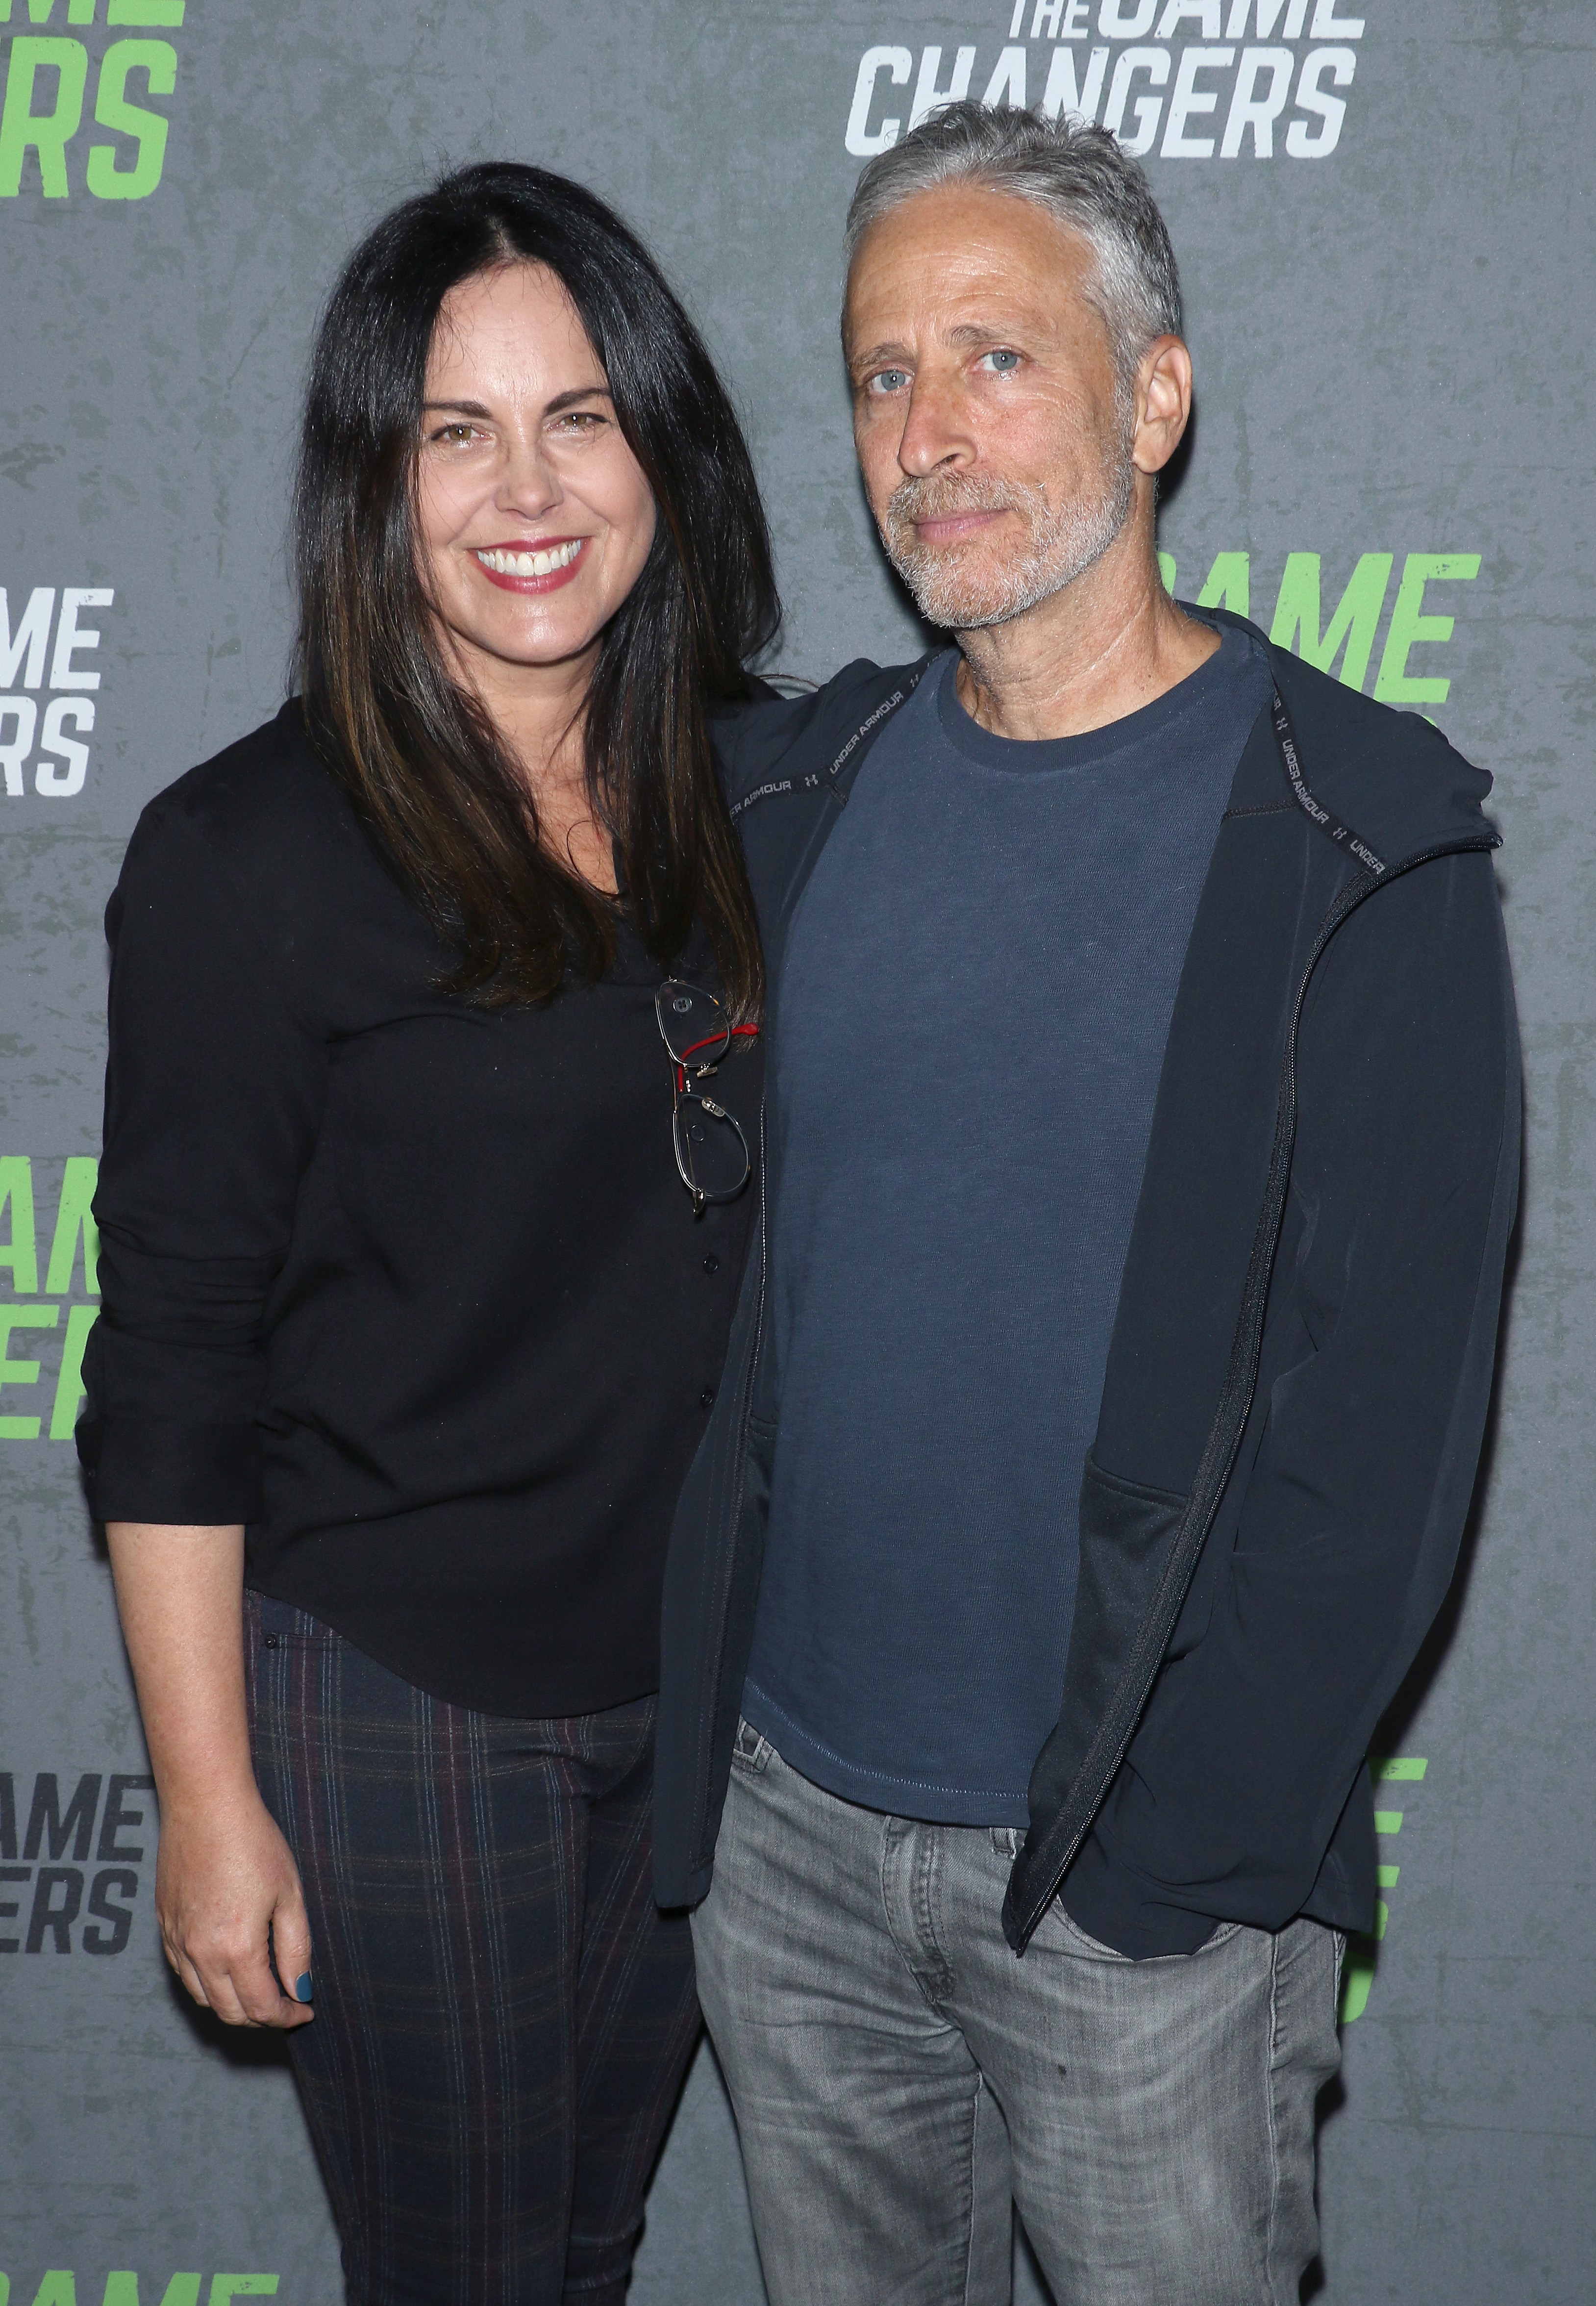 Tracey McShane and comedian Jon Stewart attend the "The Game Changers" New York premiere at Regal Battery Park 11 on September 9, 2019, in New York City | Source: Getty Images